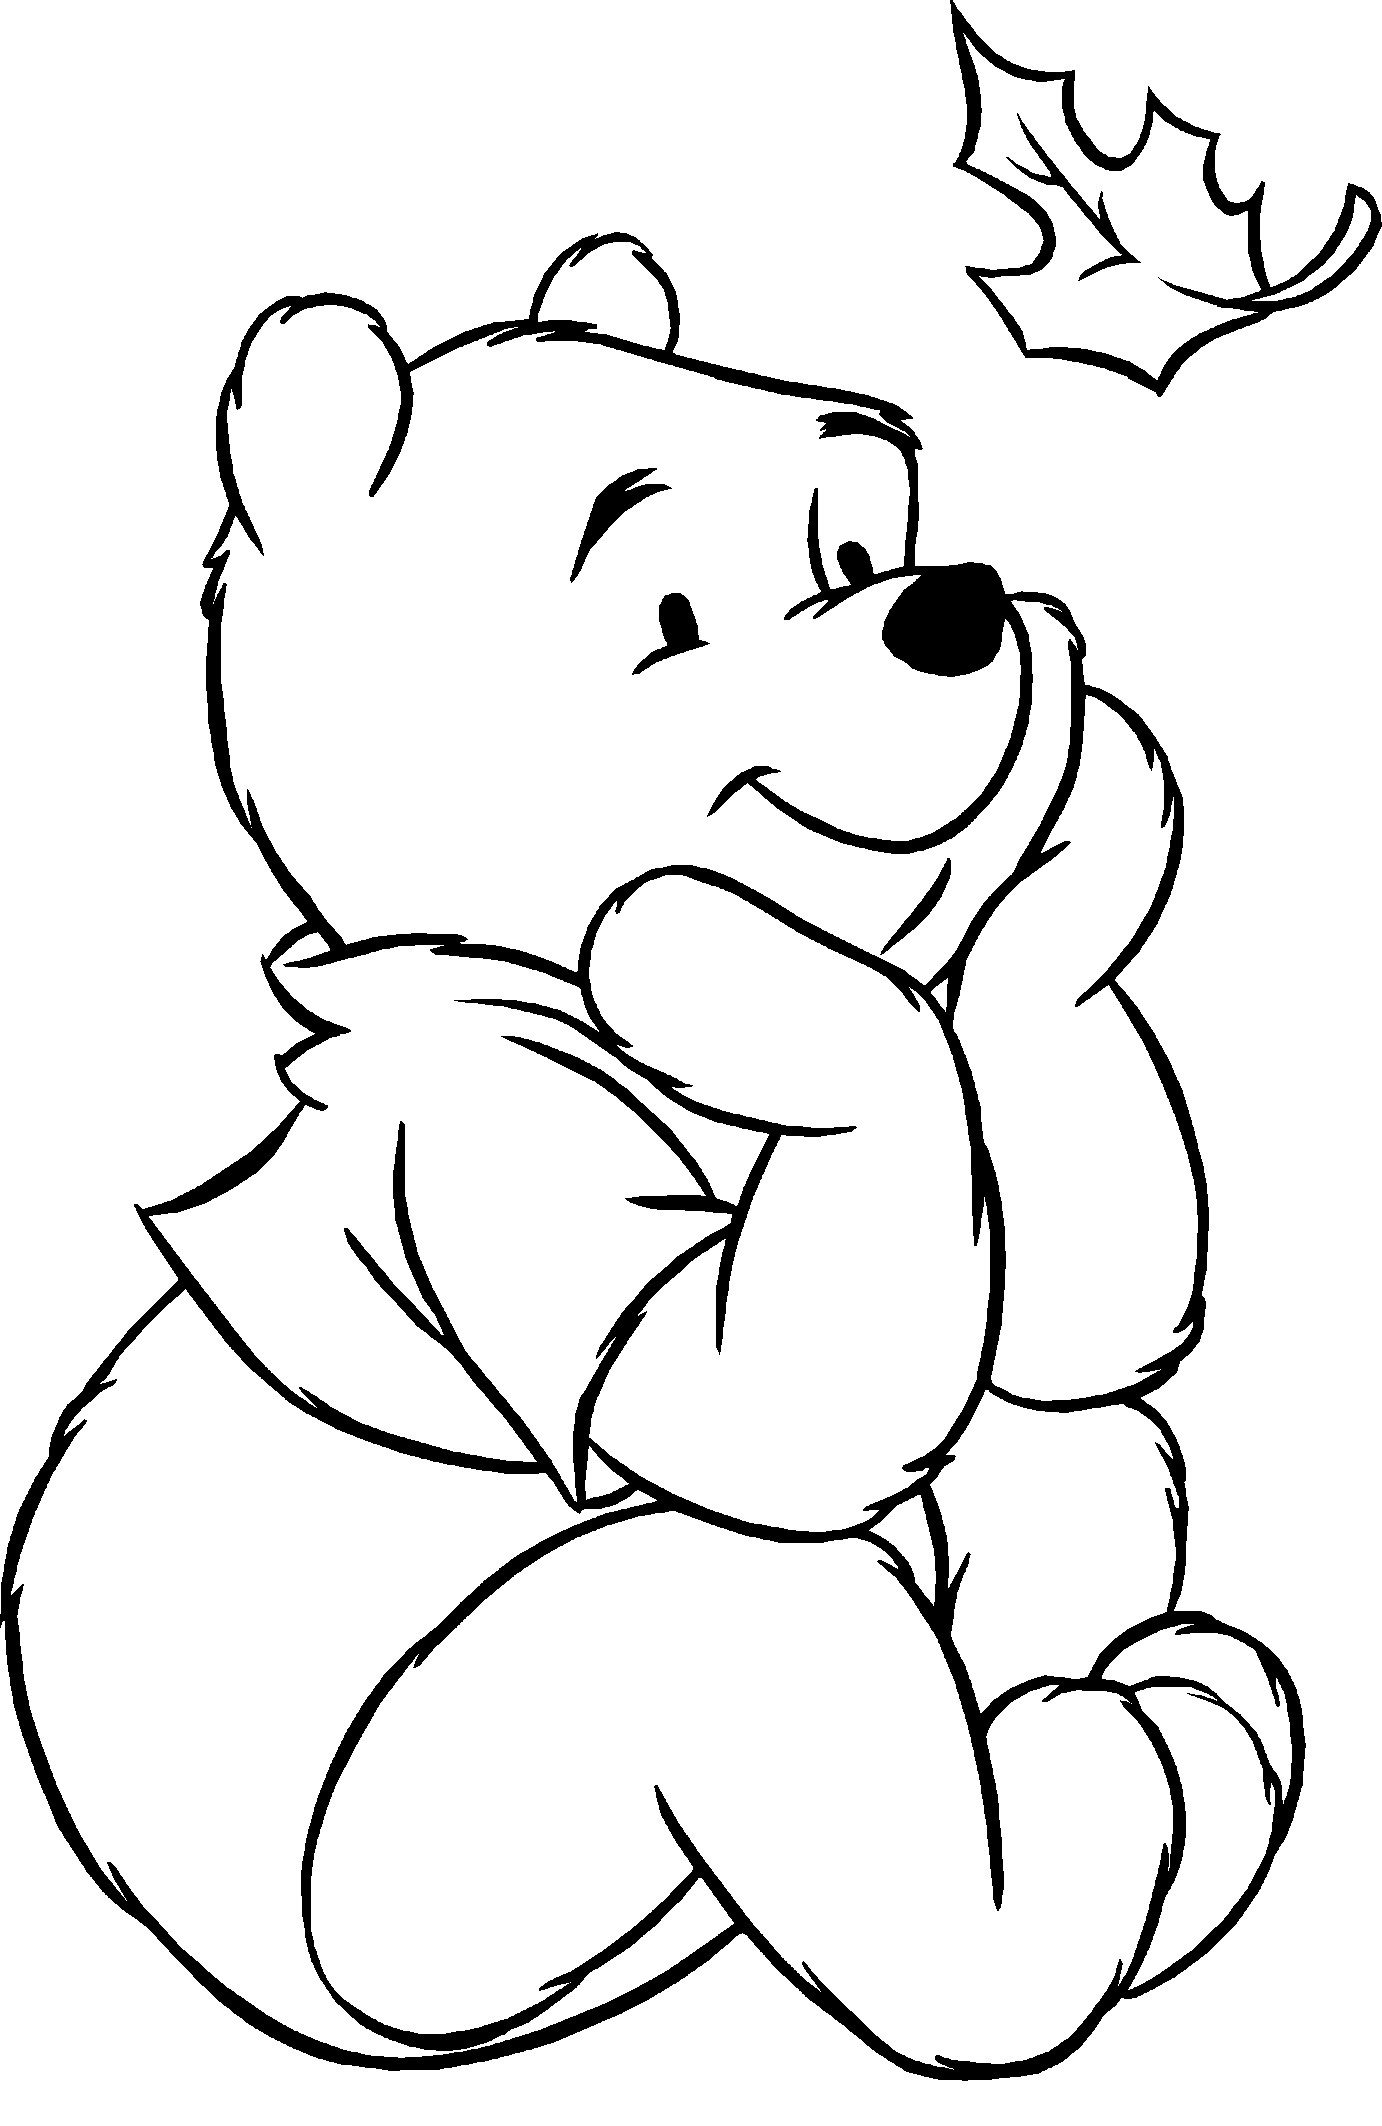 Winnie The Pooh Characters Coloring Pages | Rsad Coloring Pages